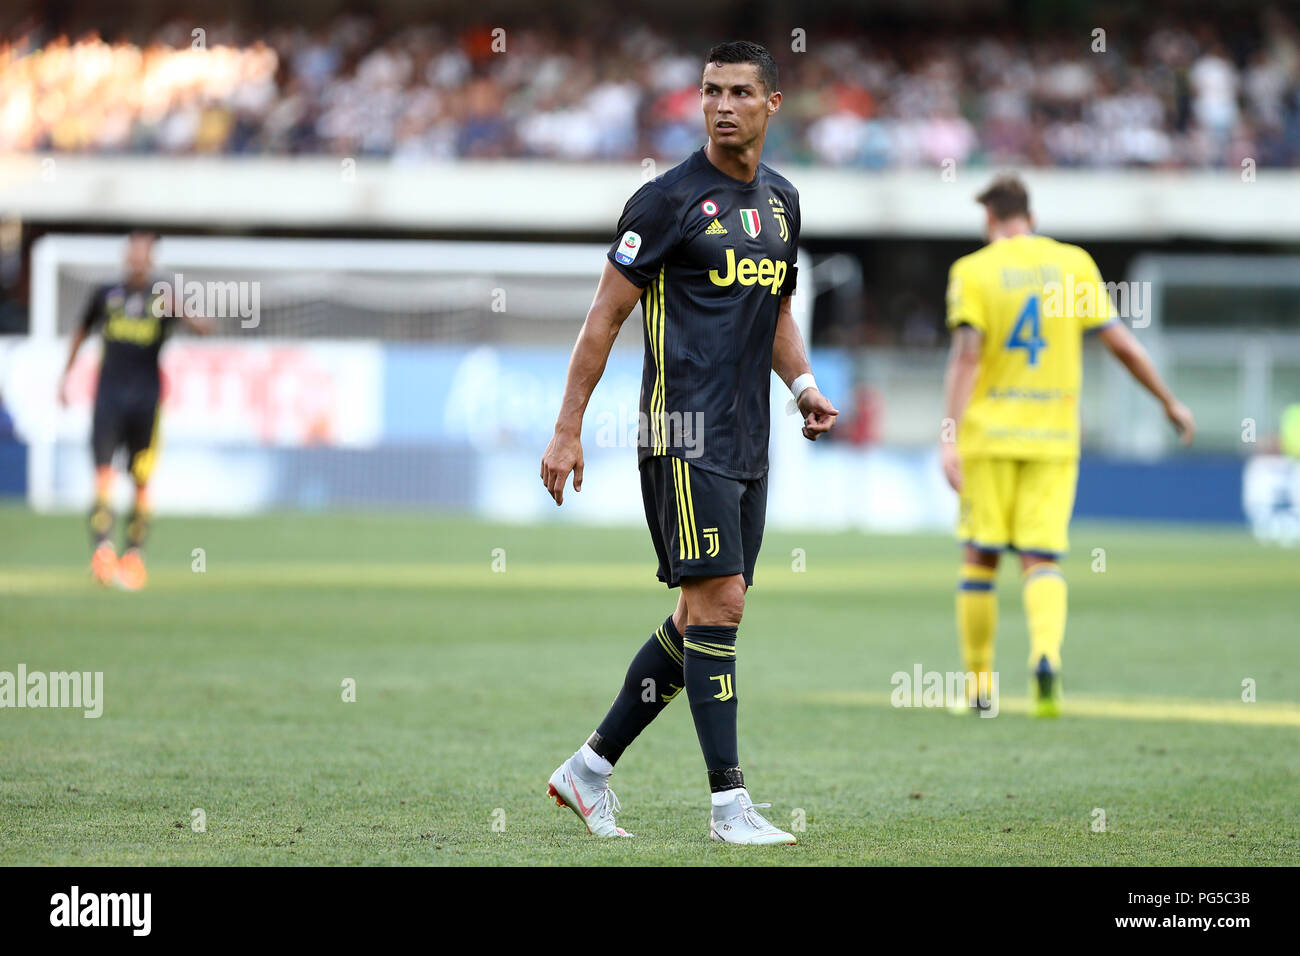 Cristiano Ronaldo of Juventus FC in action during the Serie A football  match between Ac Chievo Verona and Juventus Fc Stock Photo - Alamy